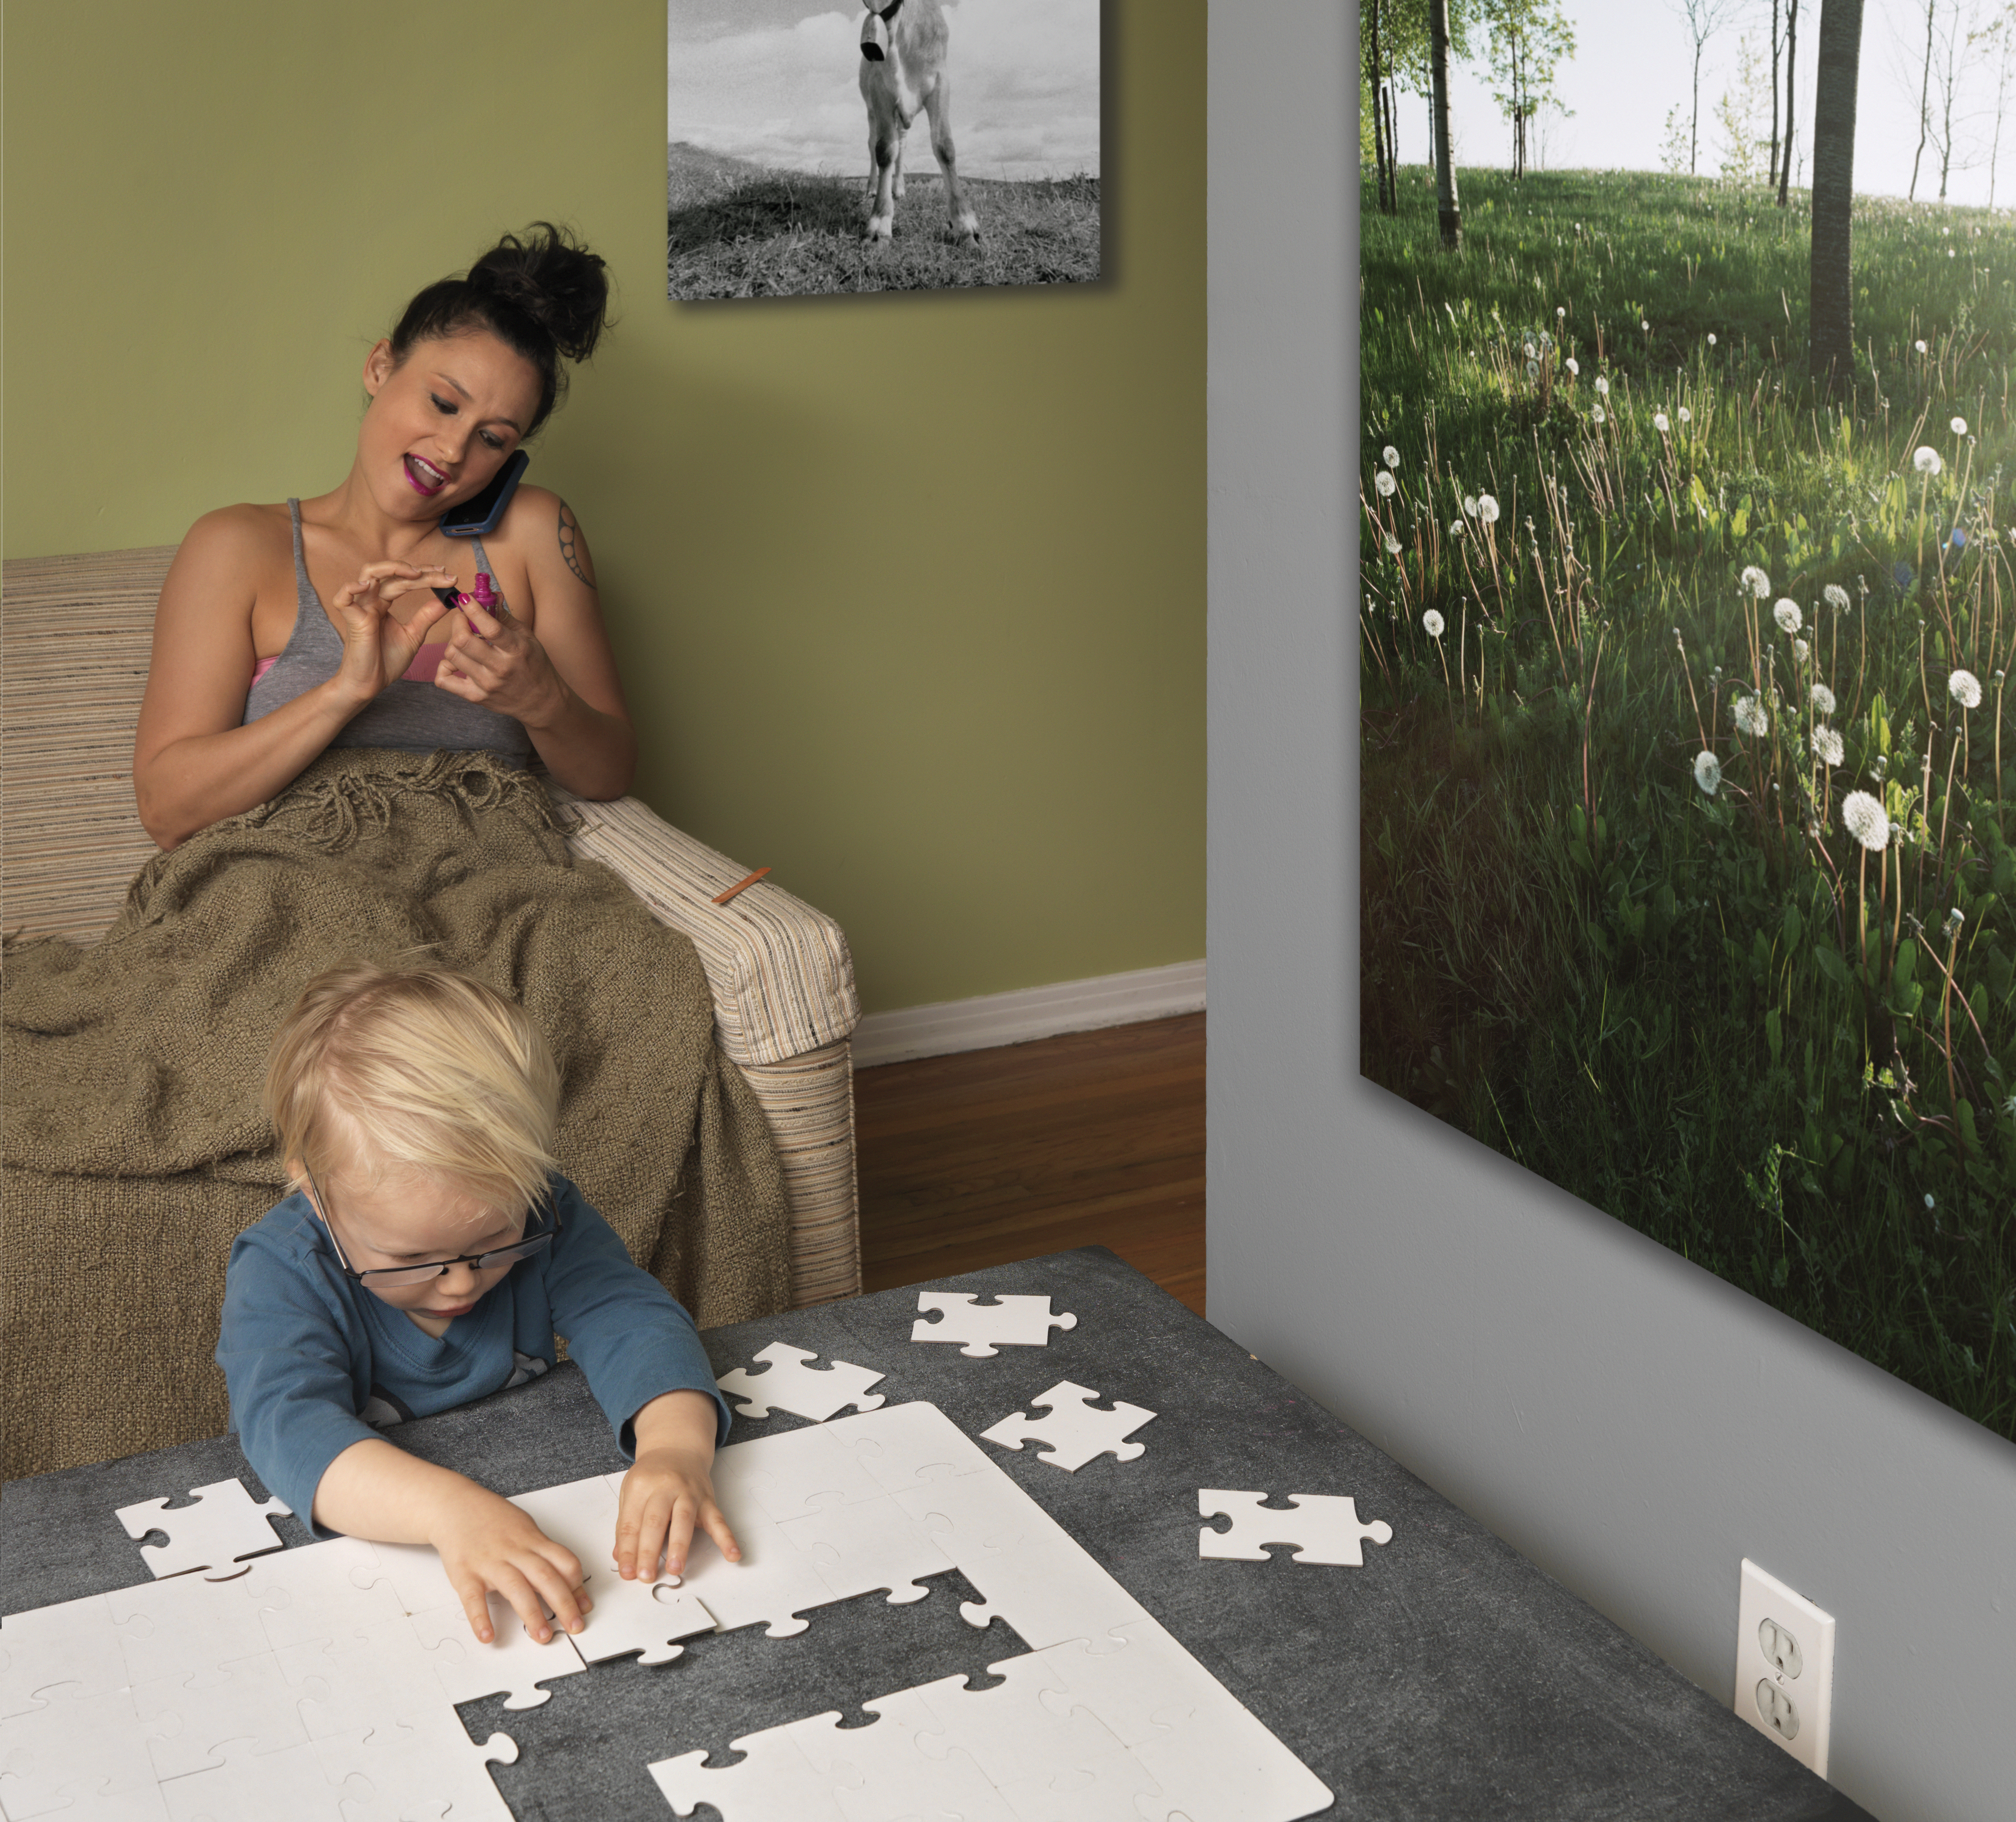 Babysitter with toddler putting together a white jigsaw puzzle (MECKY&mdash;Getty Images)